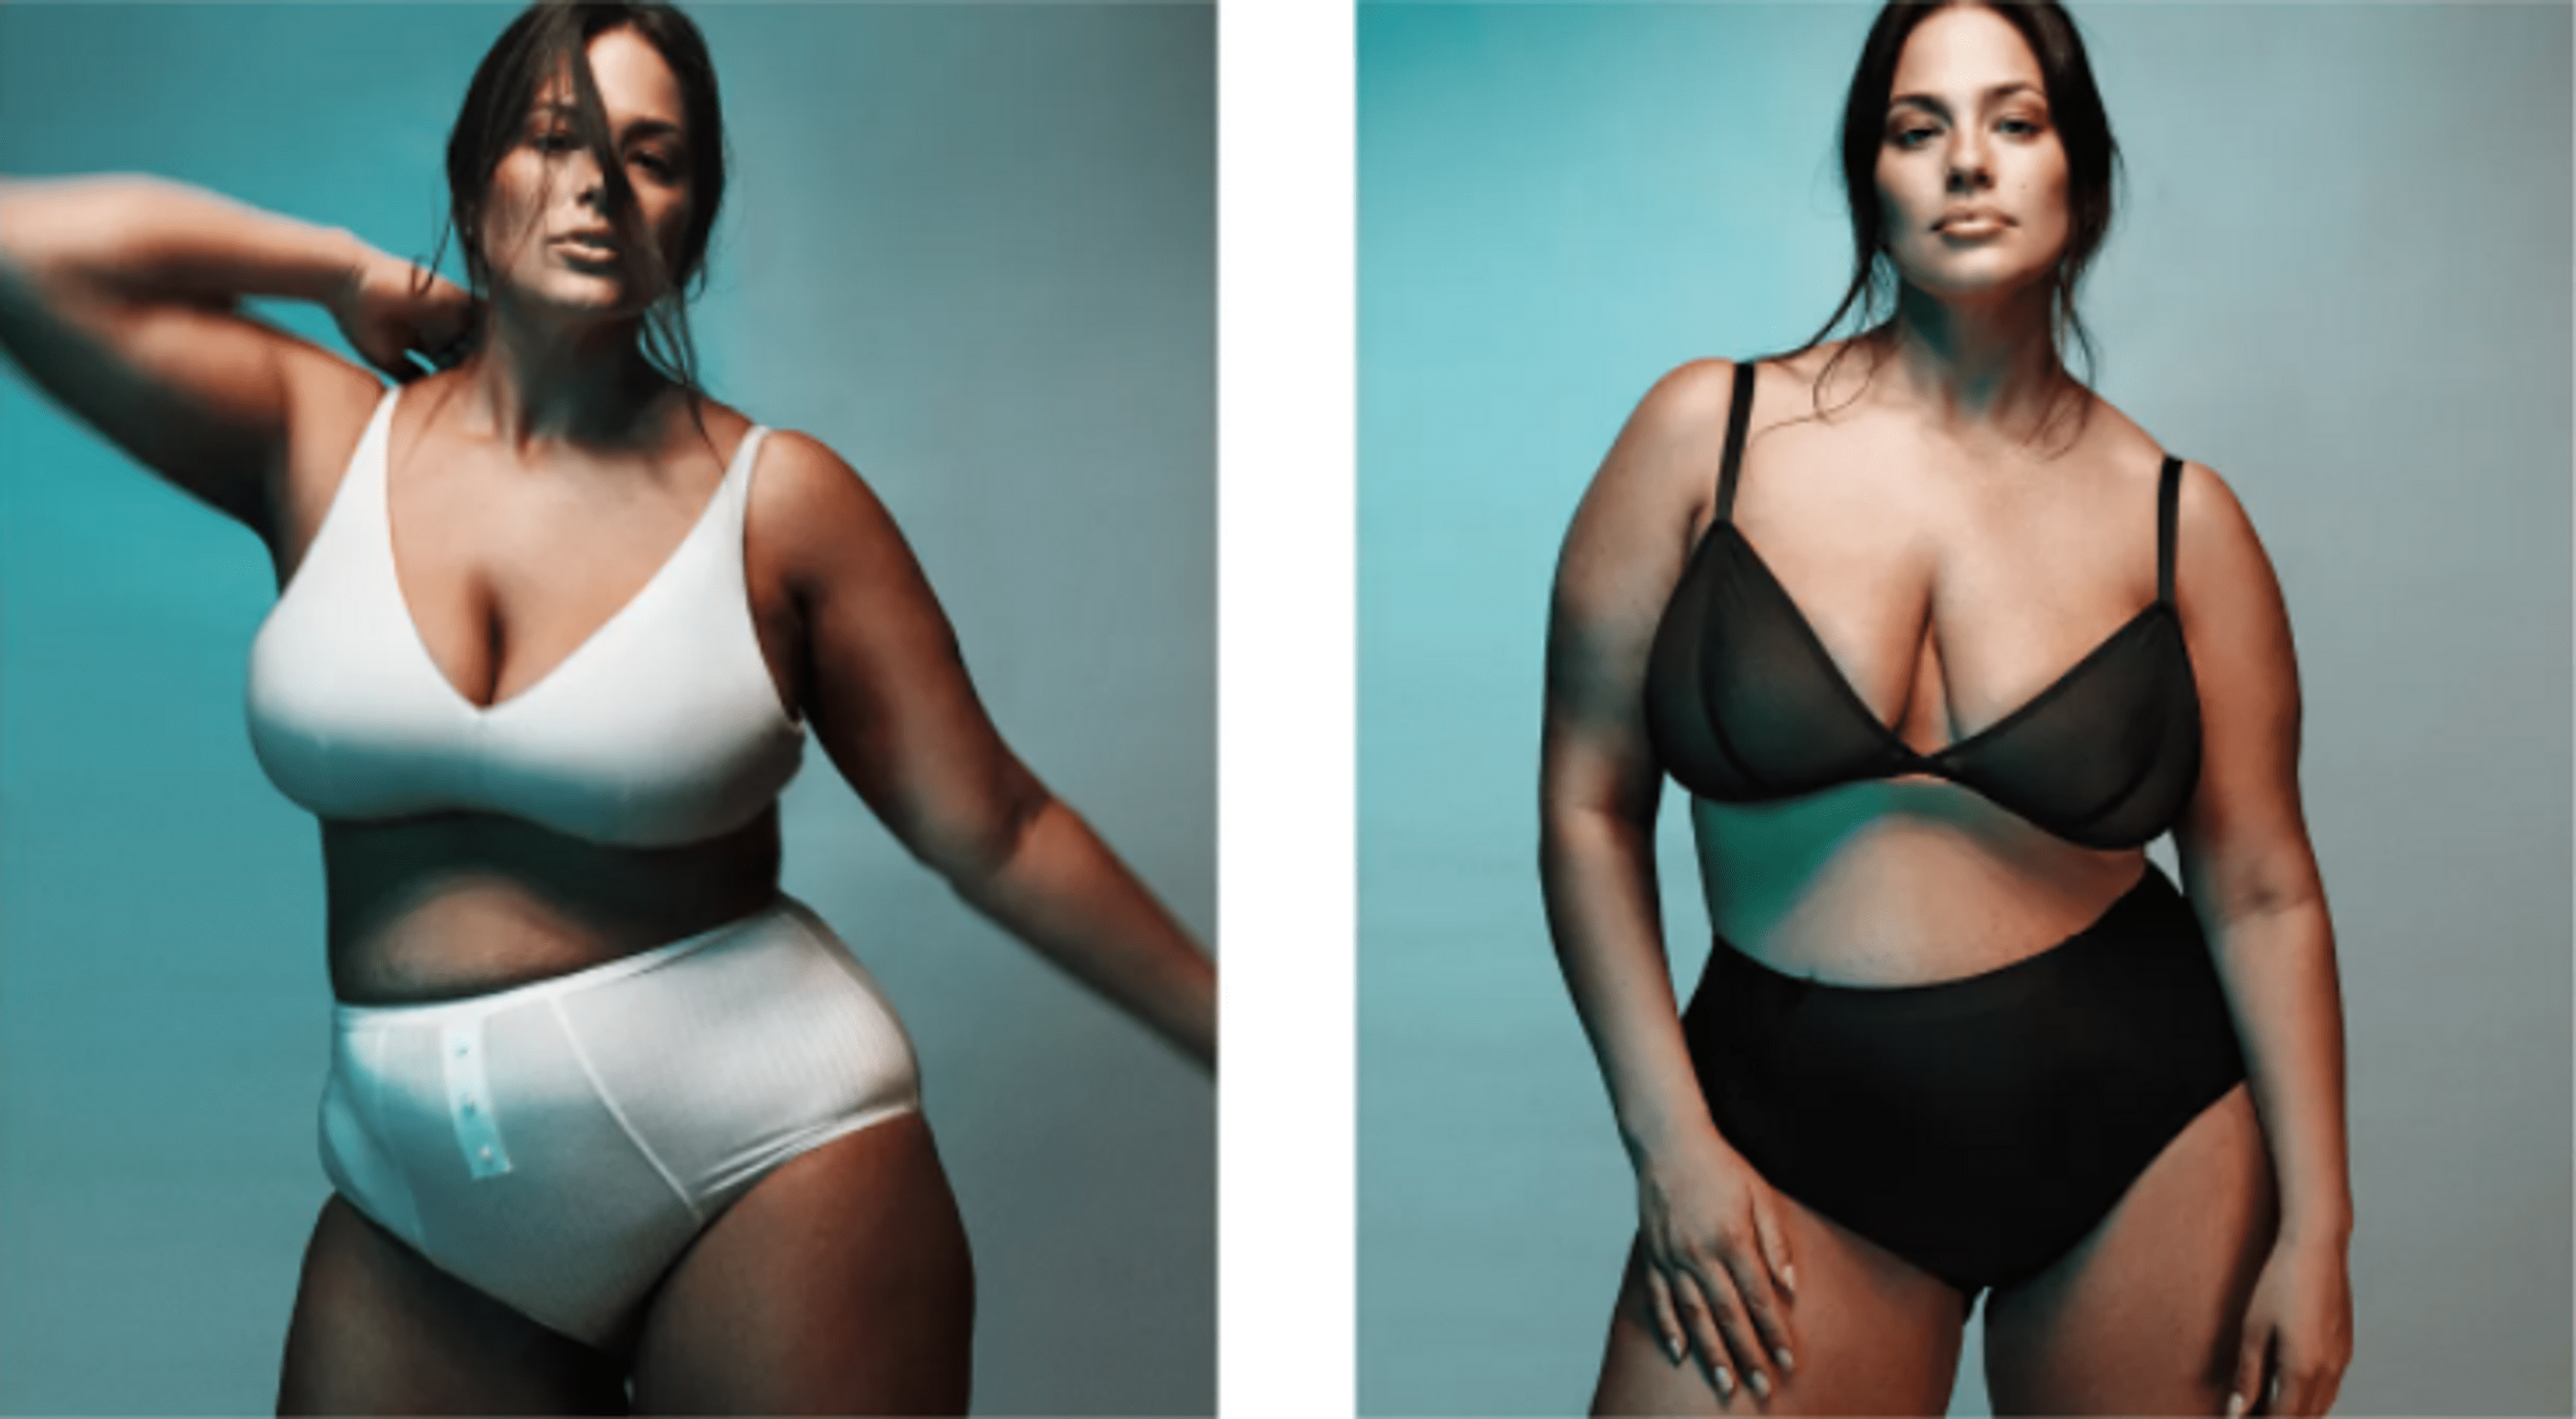 ”plus-size-model-ashley-graham-has-teamed-up-with-knix-to-launch-a-lingerie-line”